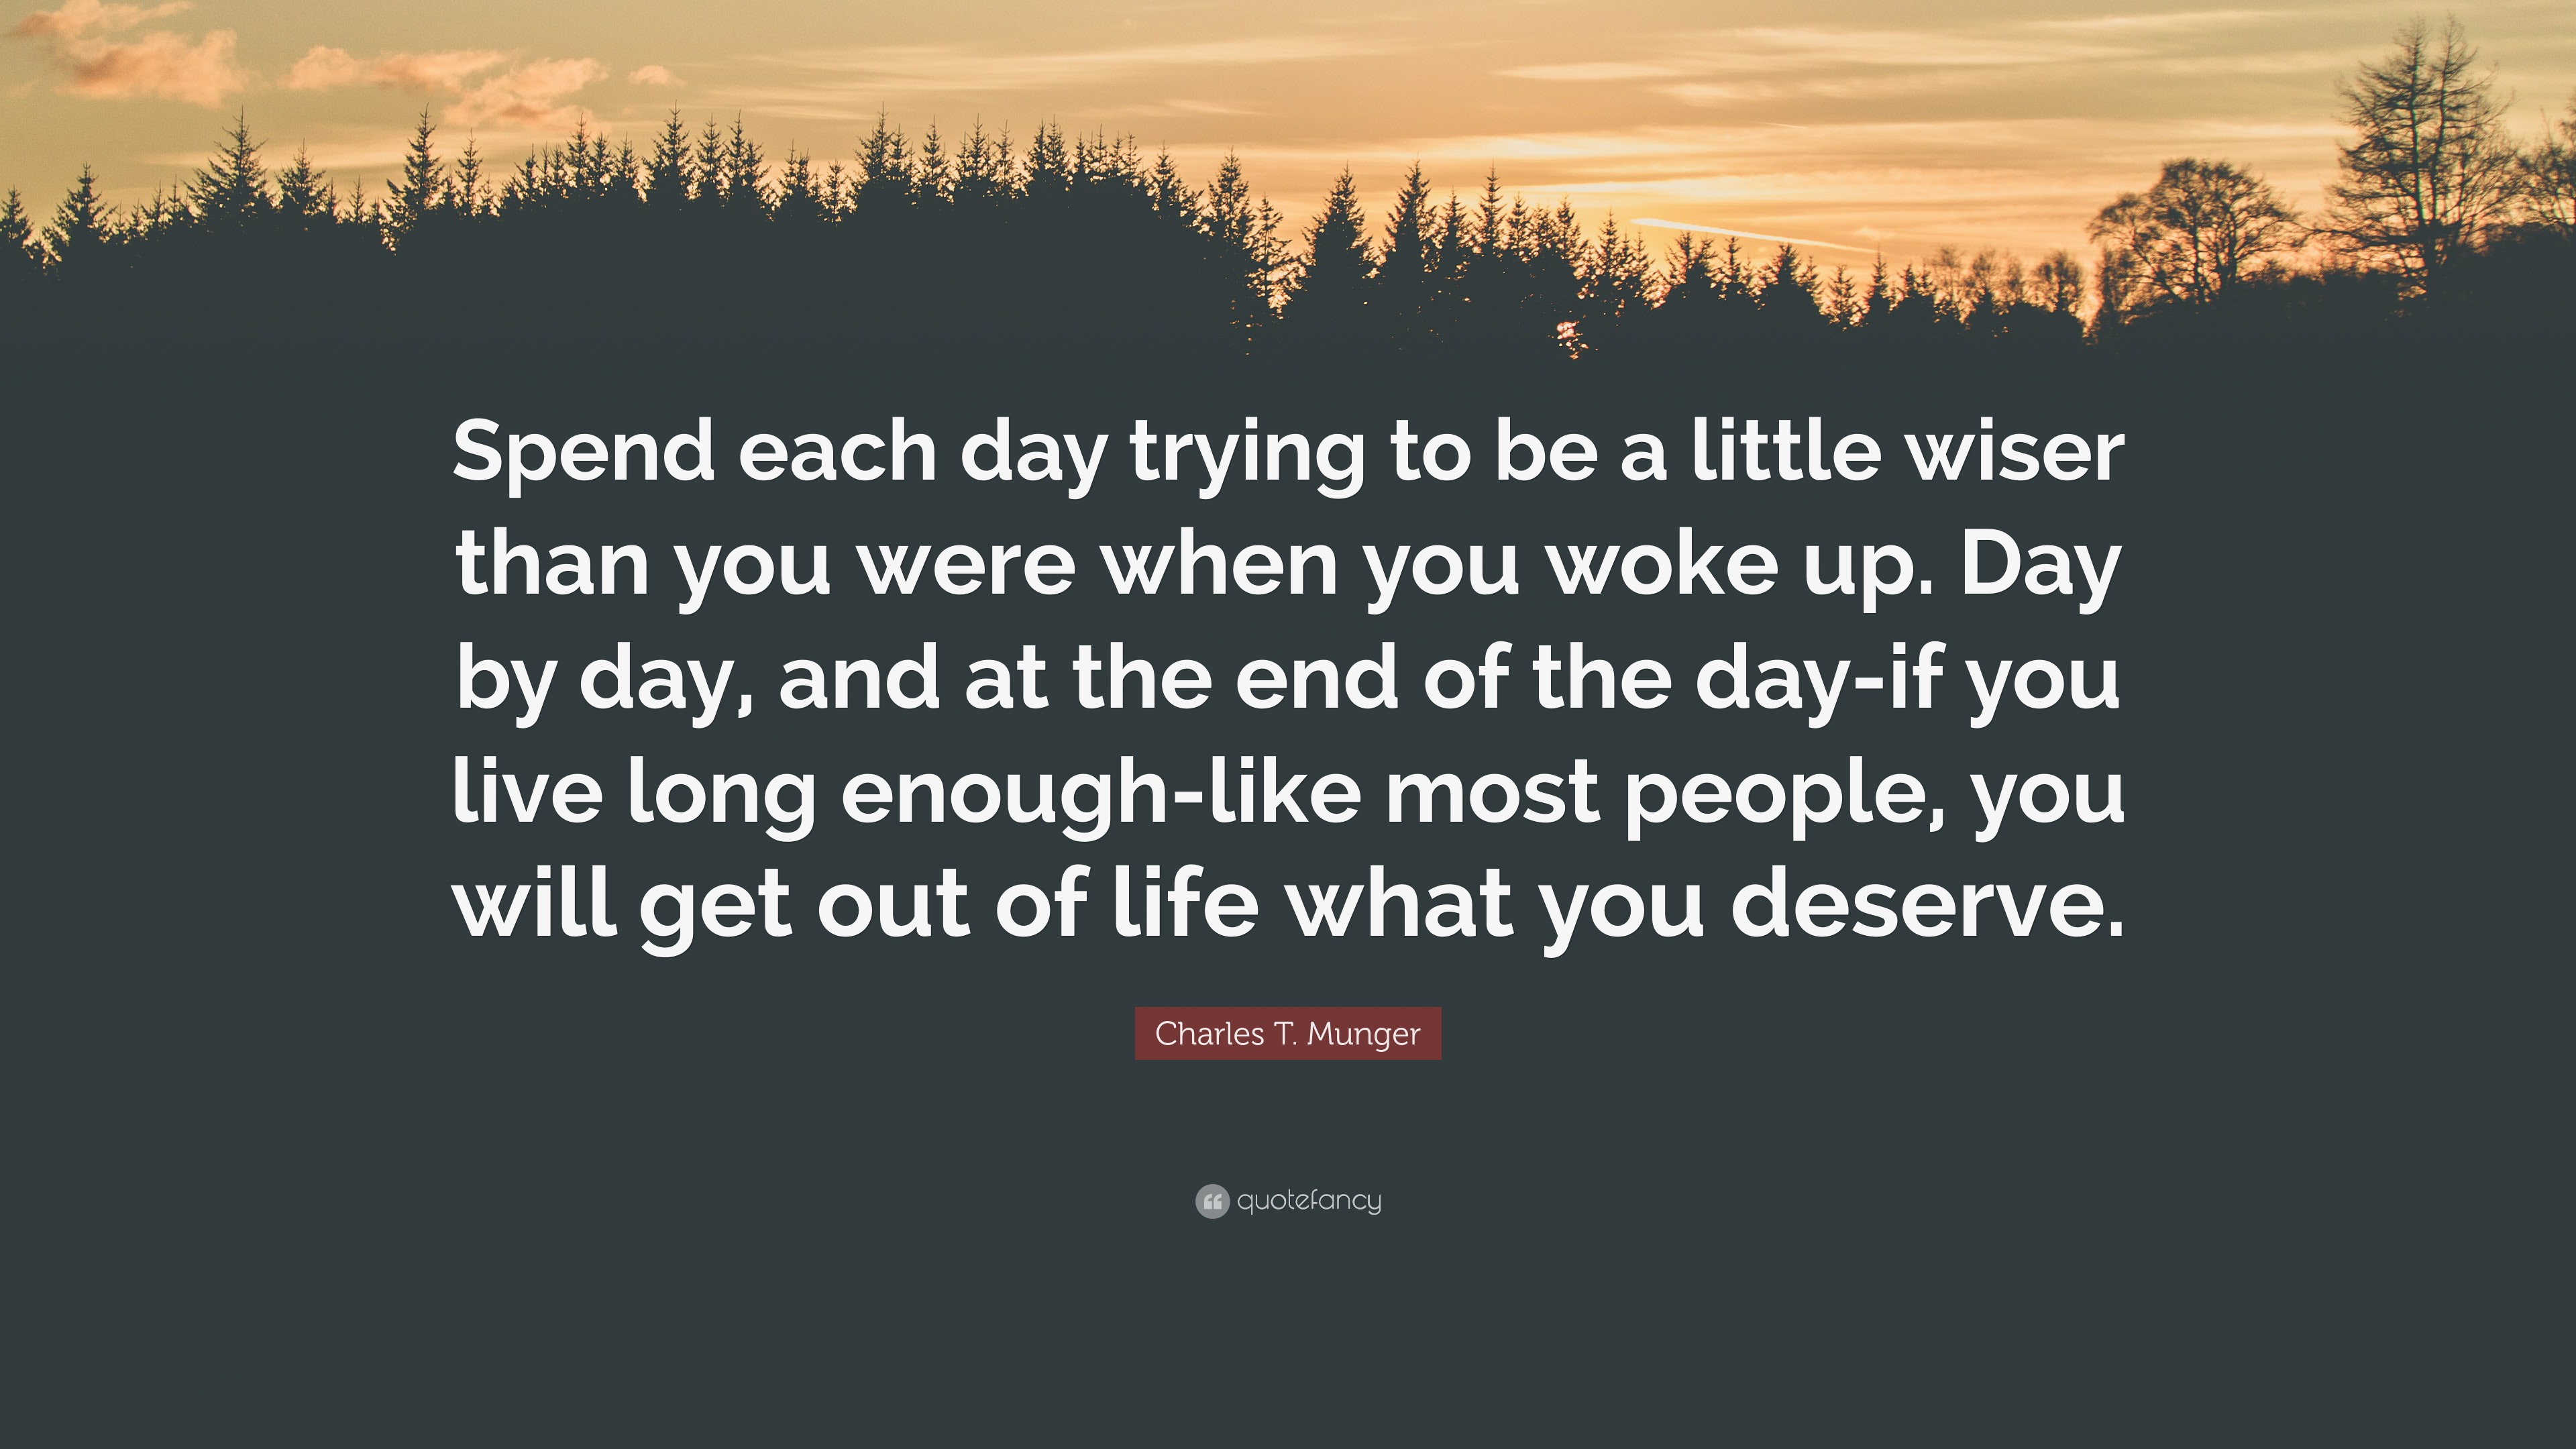 Charles T. Munger Quote: “Spend each day trying to be a little wiser ...